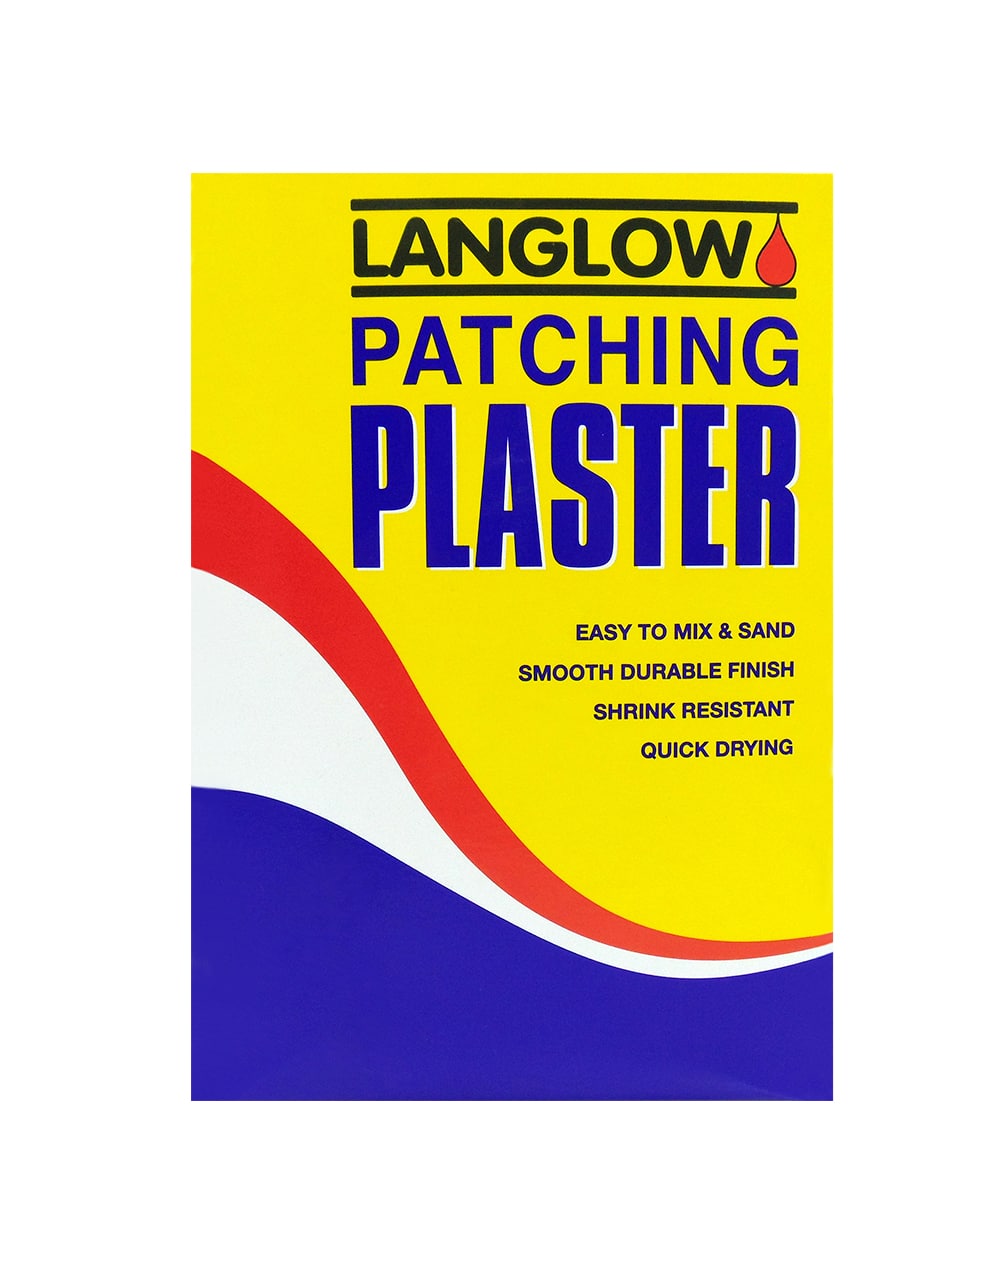 Palace Patching Plaster